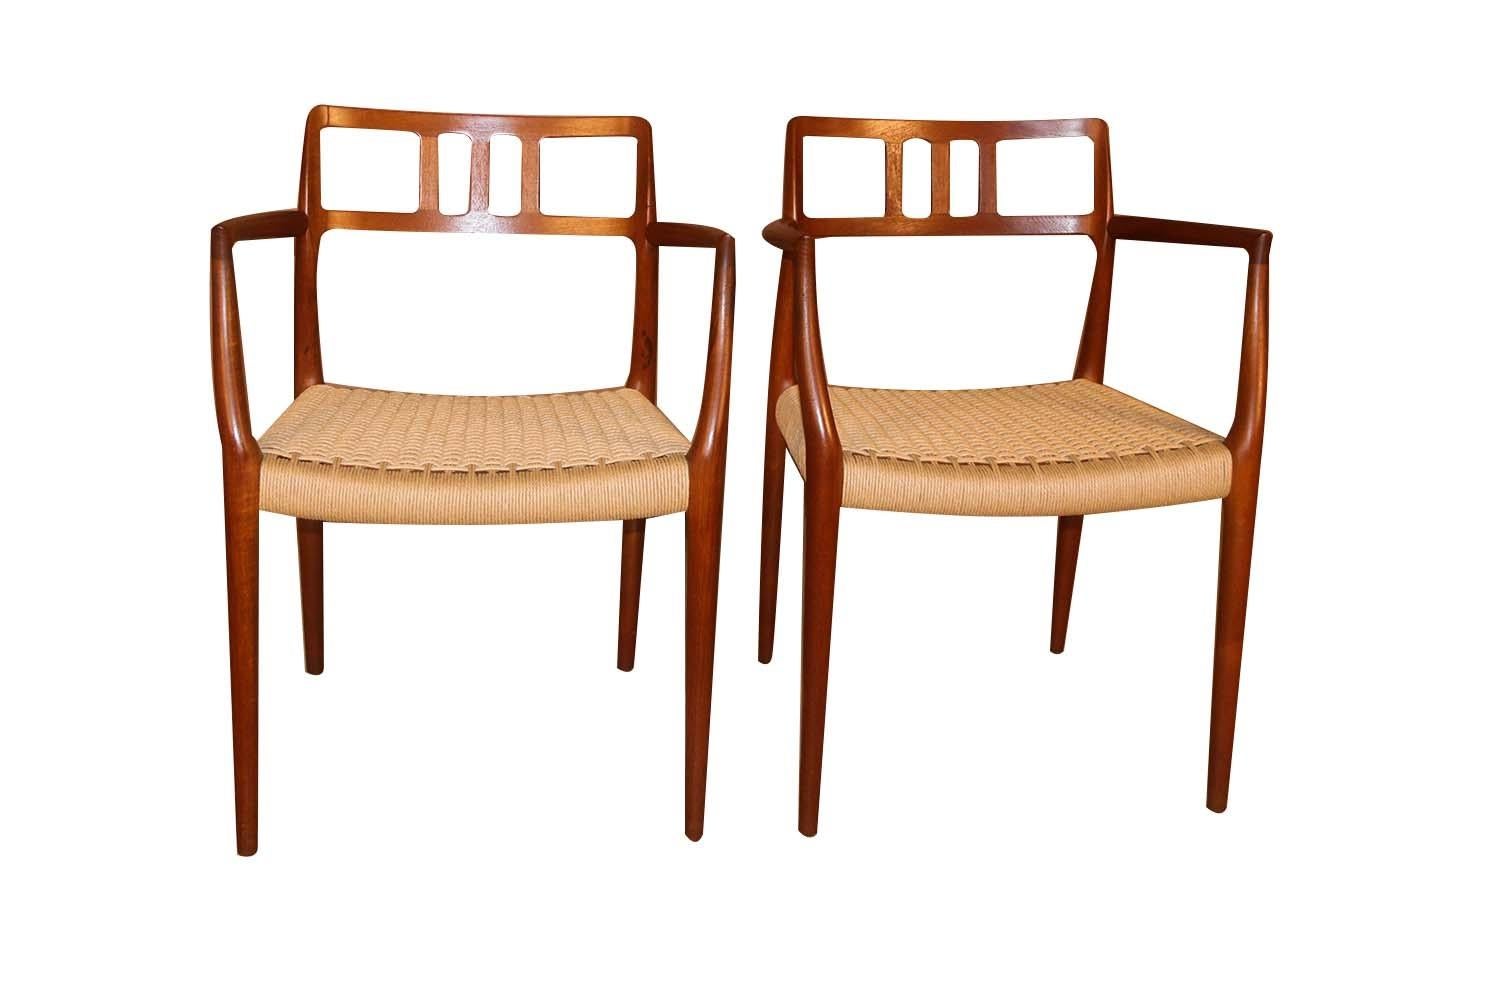 An absolutely stunning pair of midcentury, Danish, Modern, teak armchairs model 64 designed in 1964 by famous designer Niels Otto Moller for J.L. Møllers Møbelfabrik in Denmark. These gorgeous, rarely seen chairs feature beautifully sculpted teak